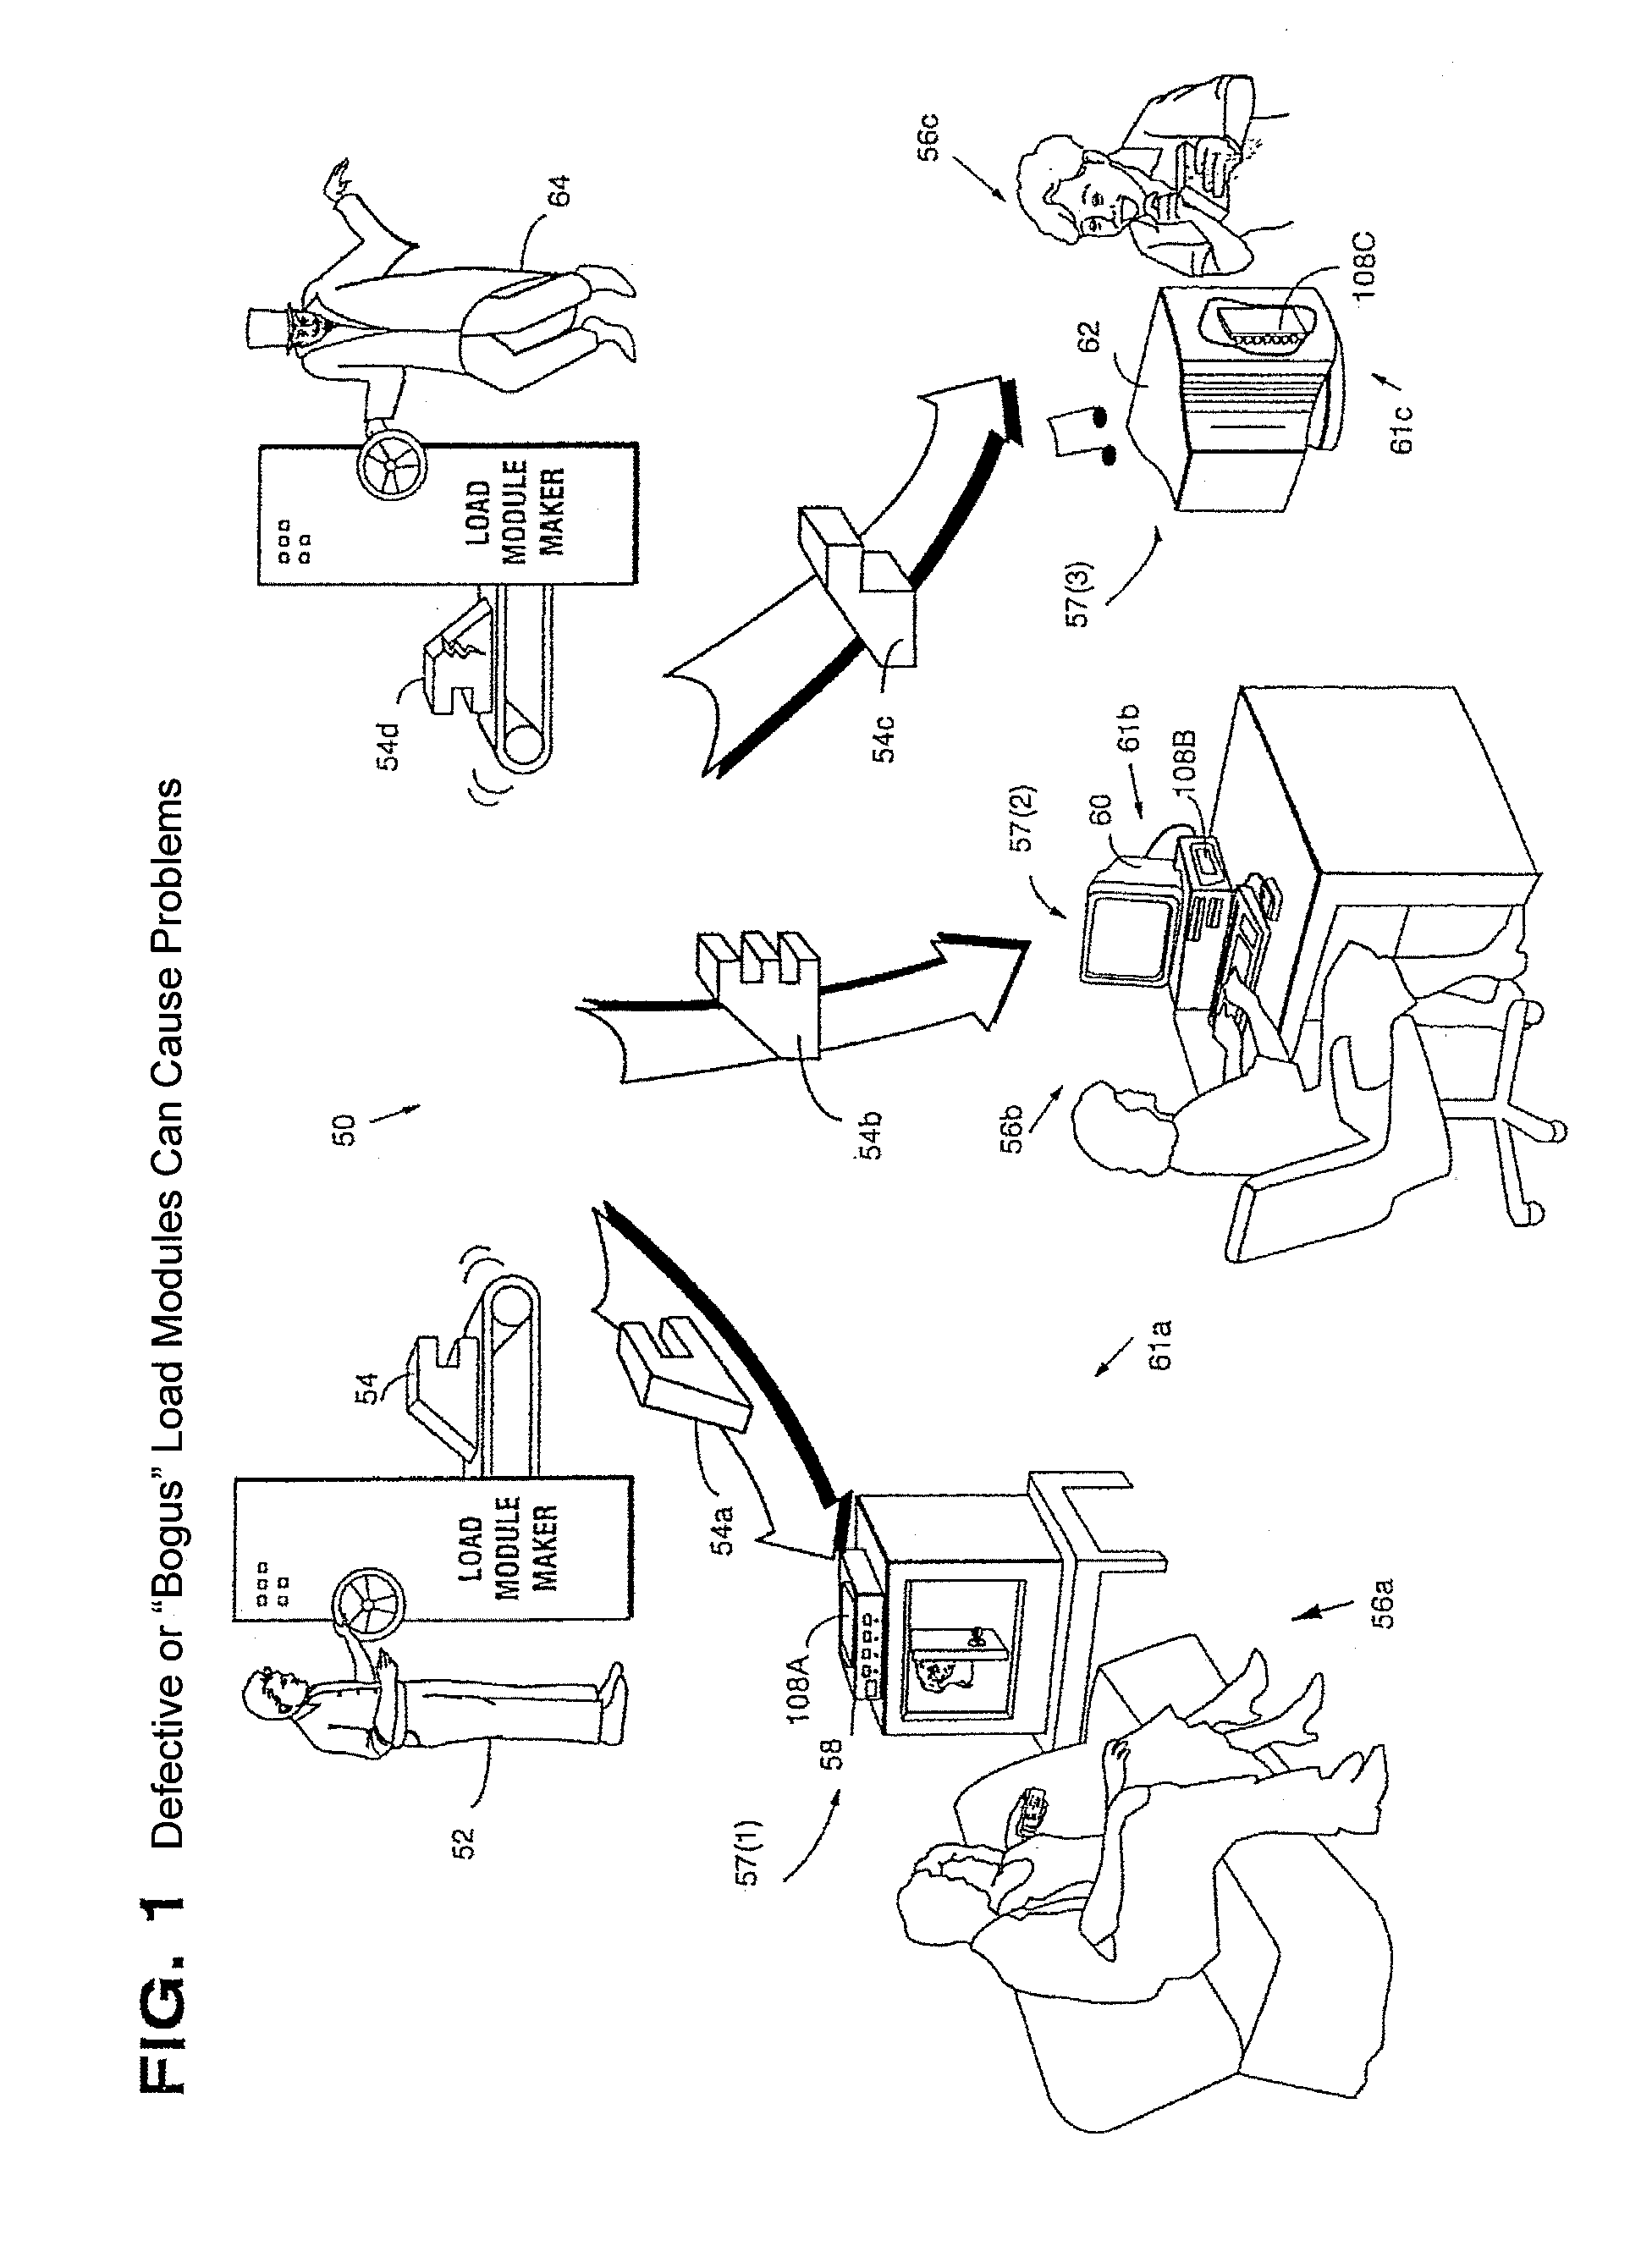 Systems and methods for using cryptography to protect secure and insecure computing environments